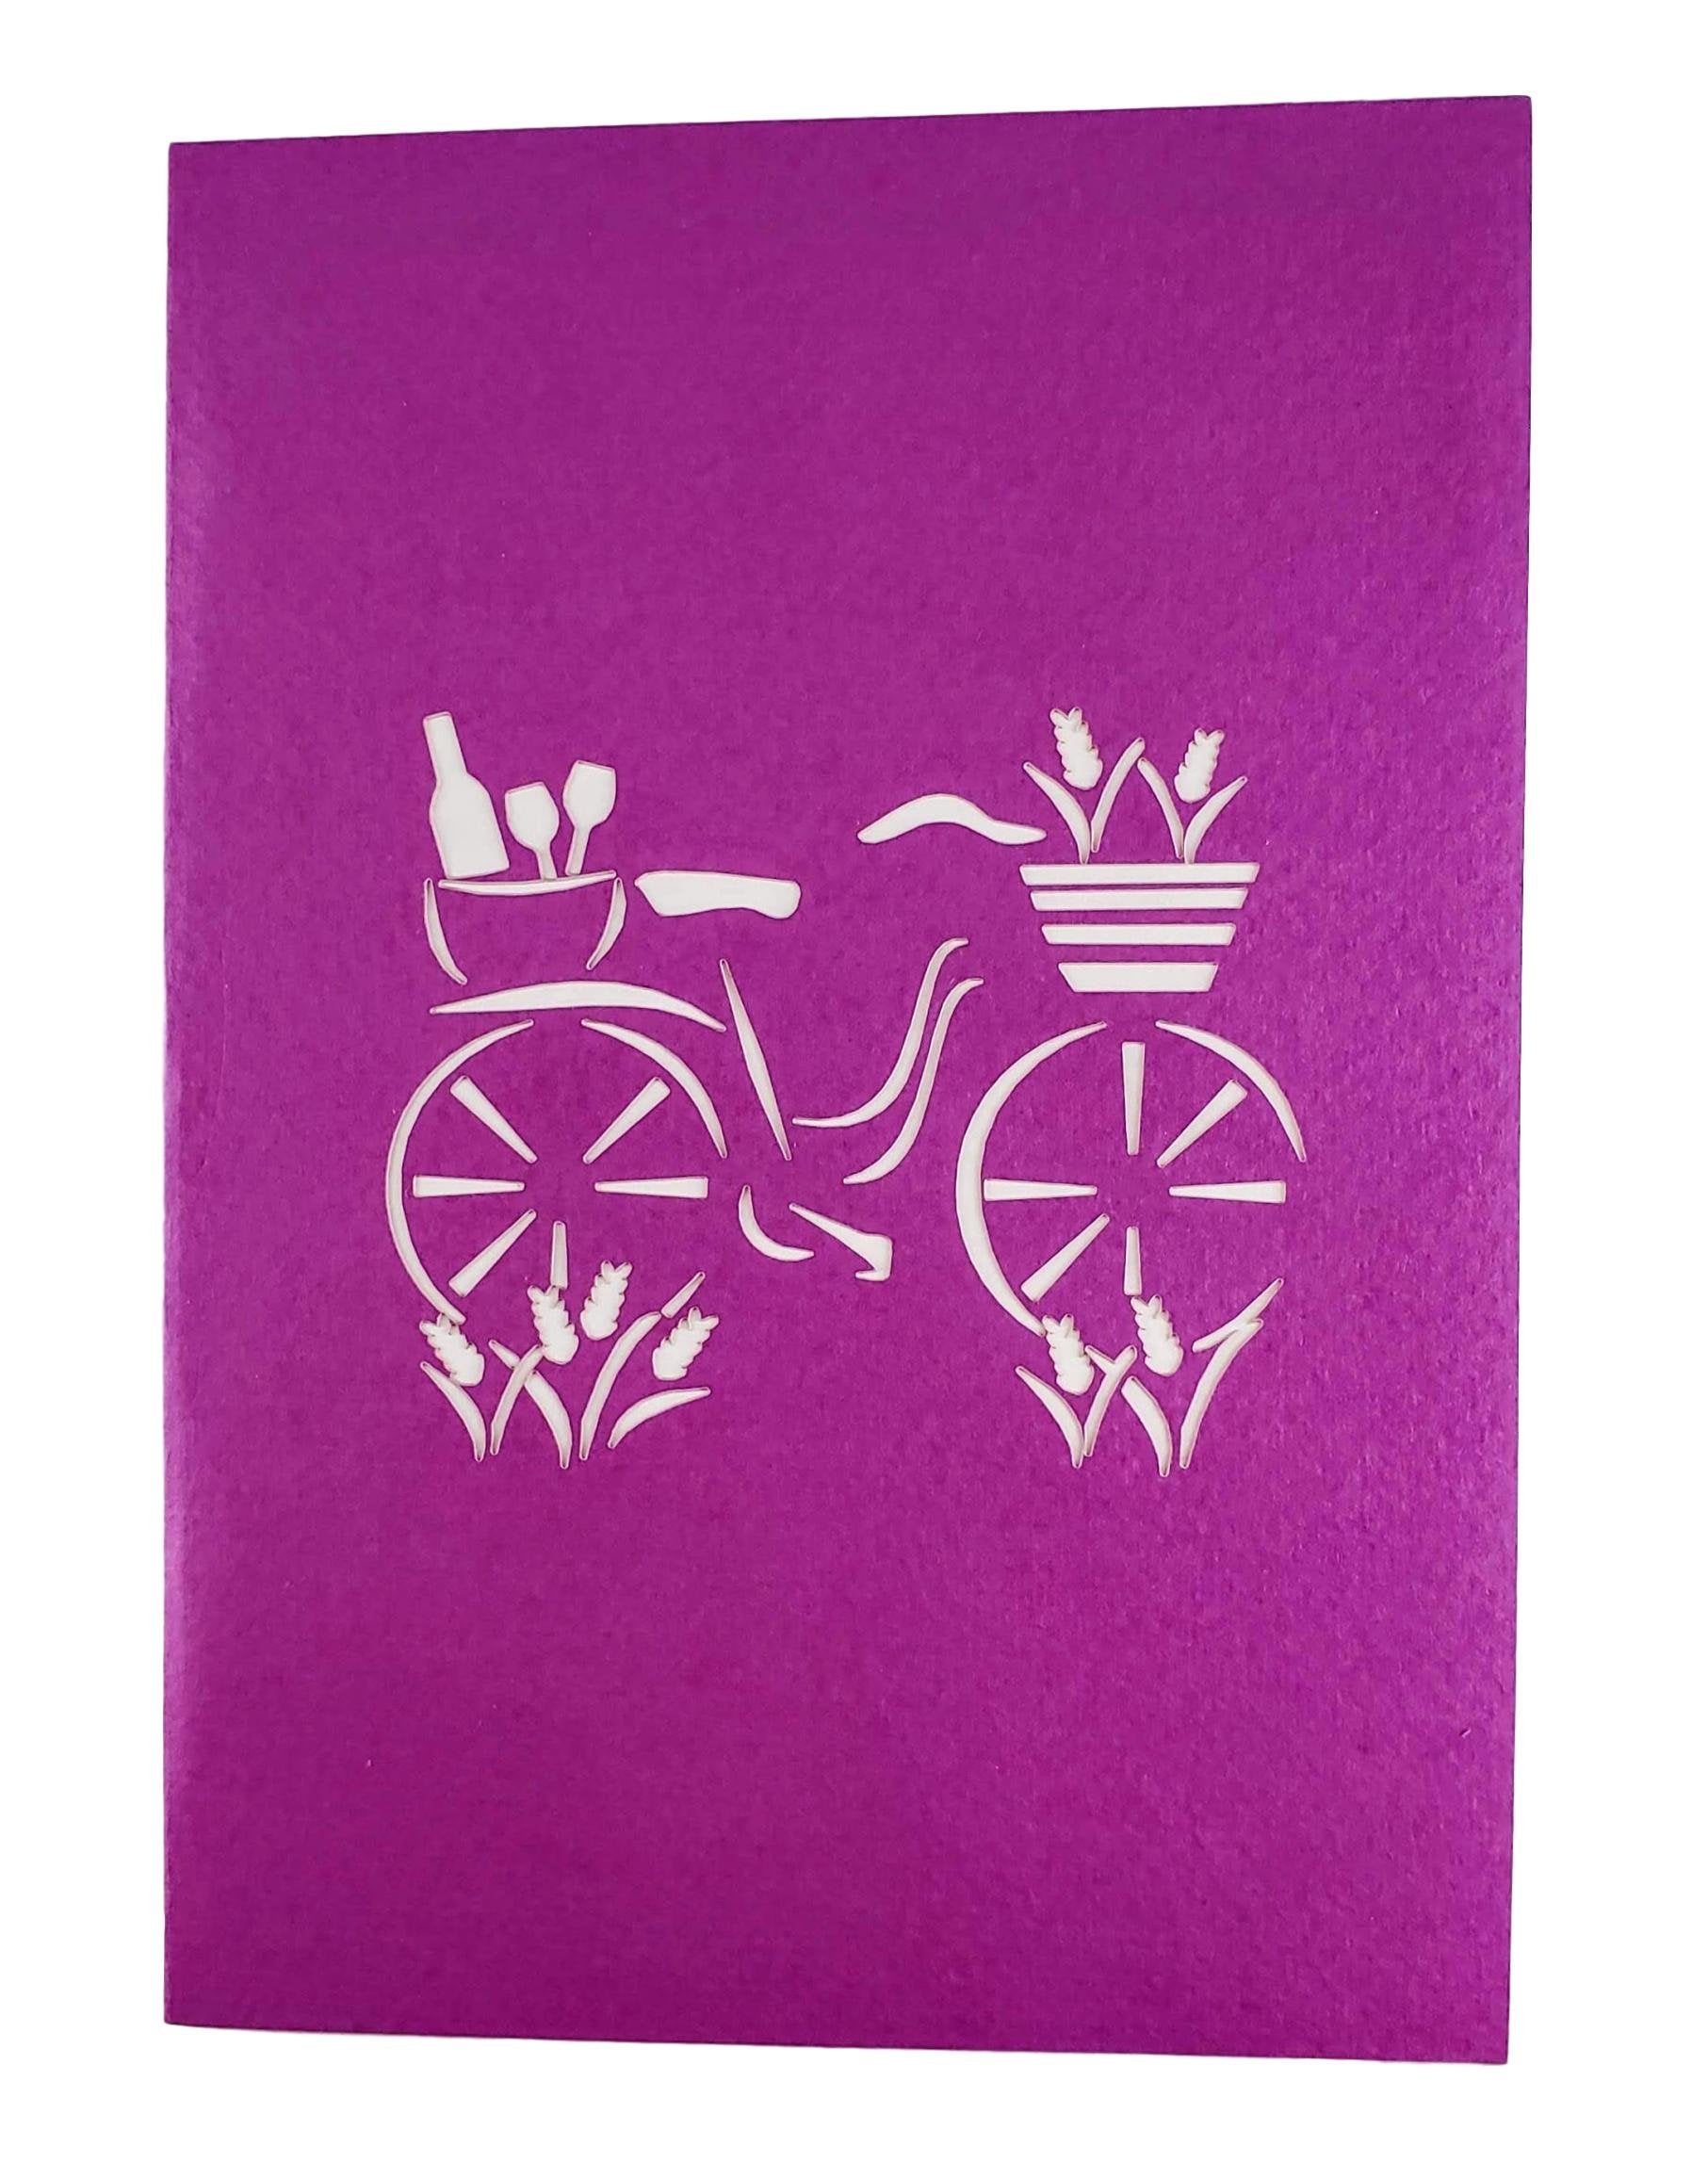 Fun Bike and Fine Wine 3D Pop Up Greeting Card - 99 shipping July 2020 - Bike - Flower - Fun - spous - iGifts And Cards